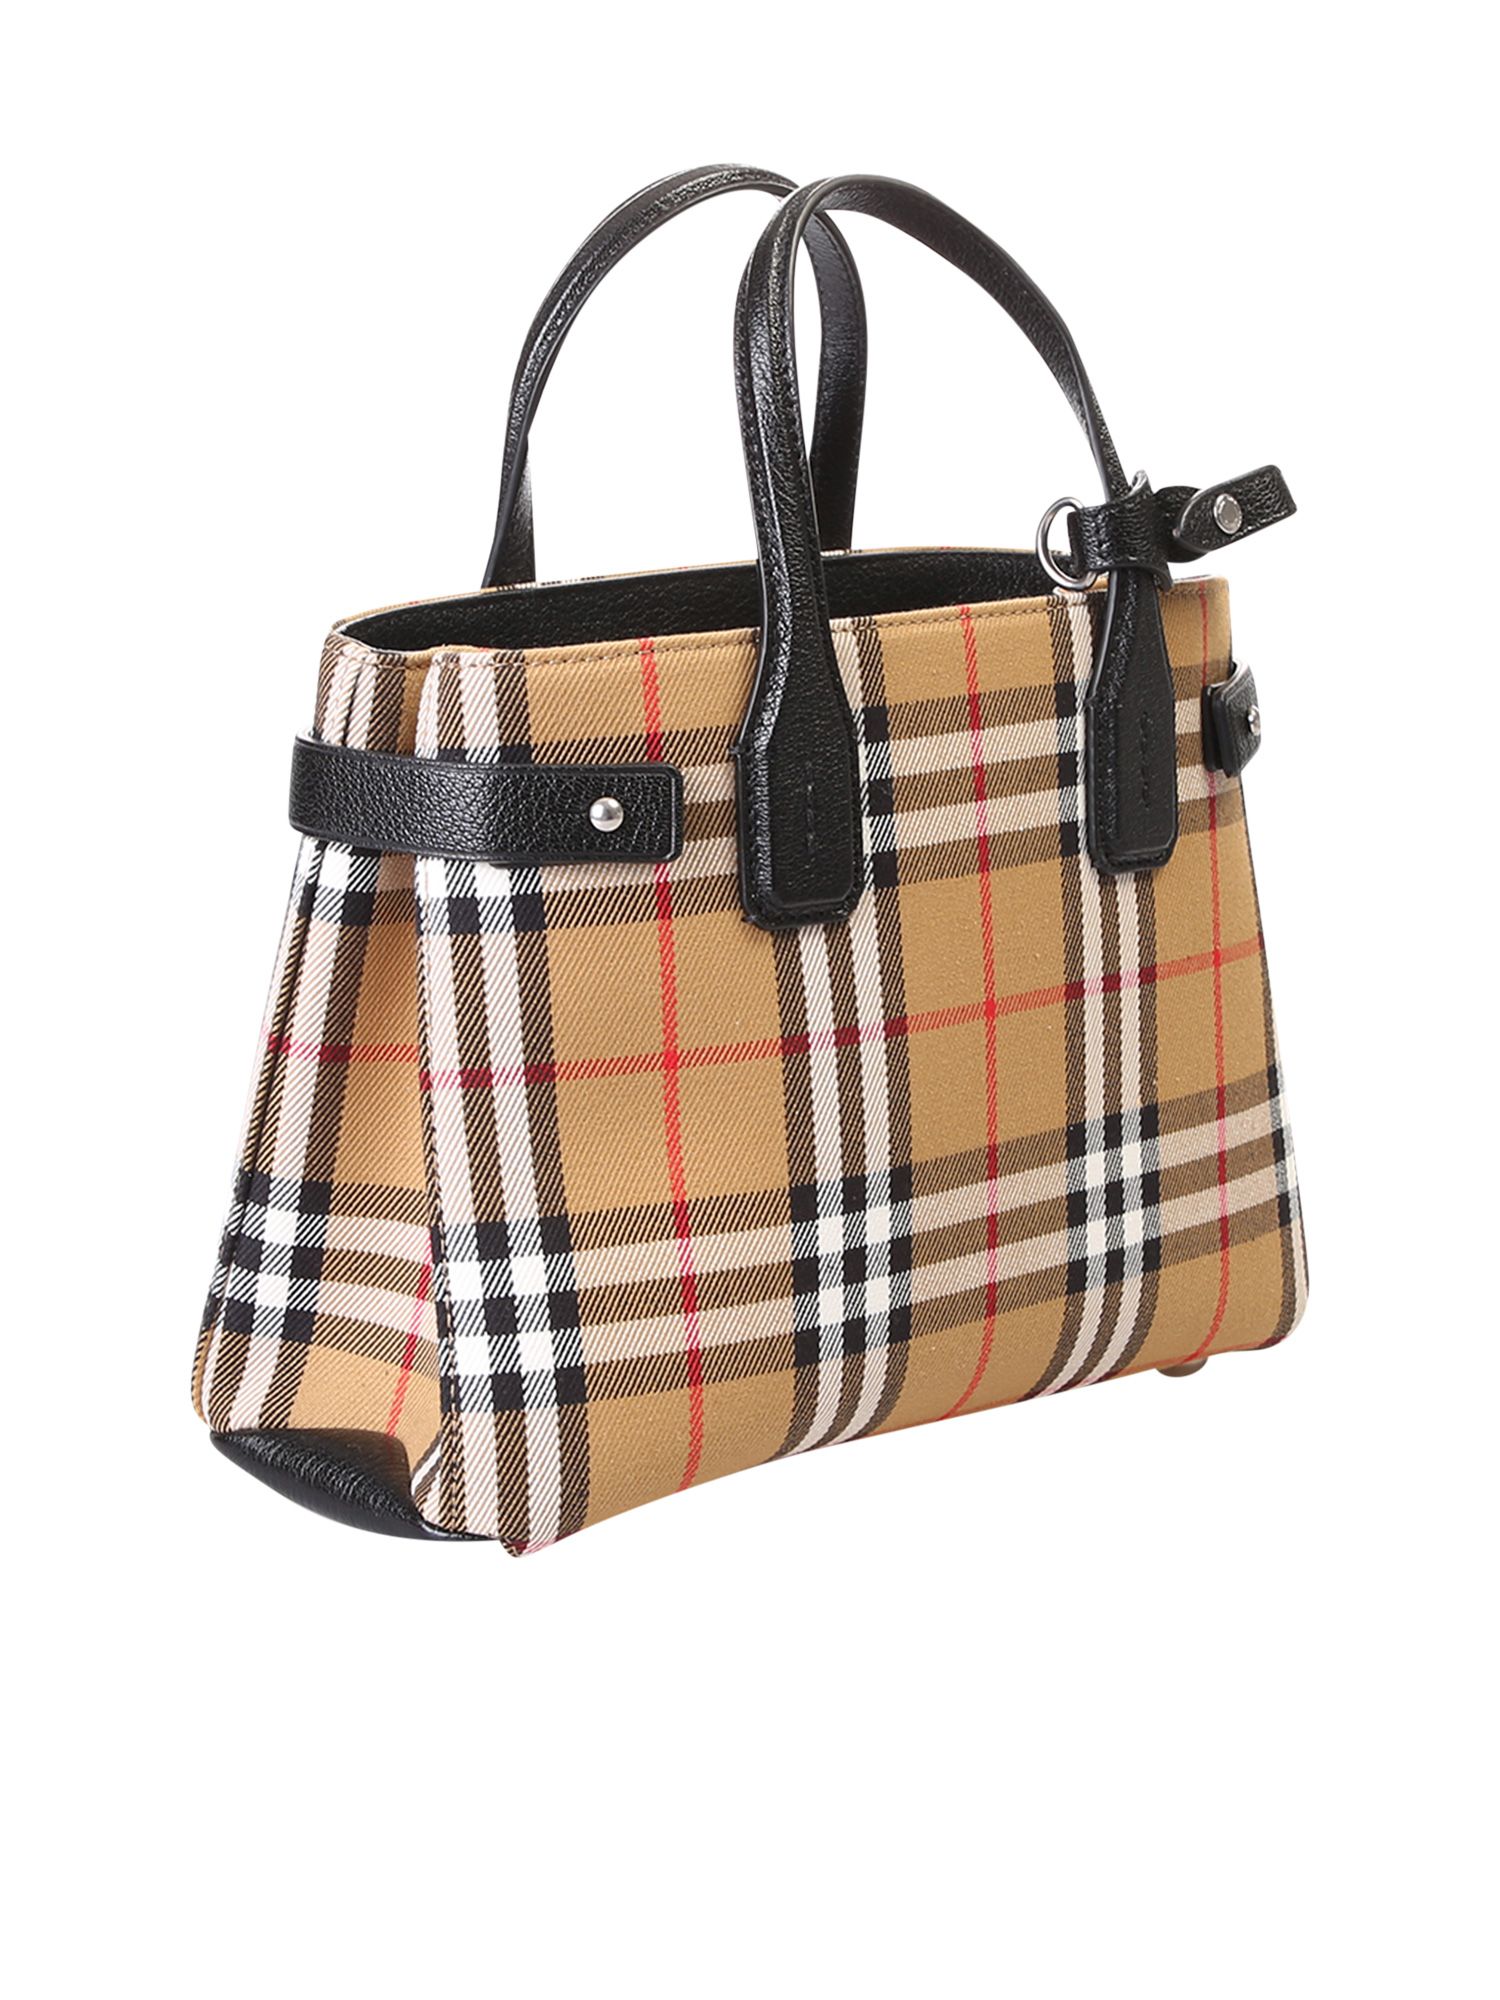 Burberry Burberry Small Banner Bag - Beige - 10830300 | italist